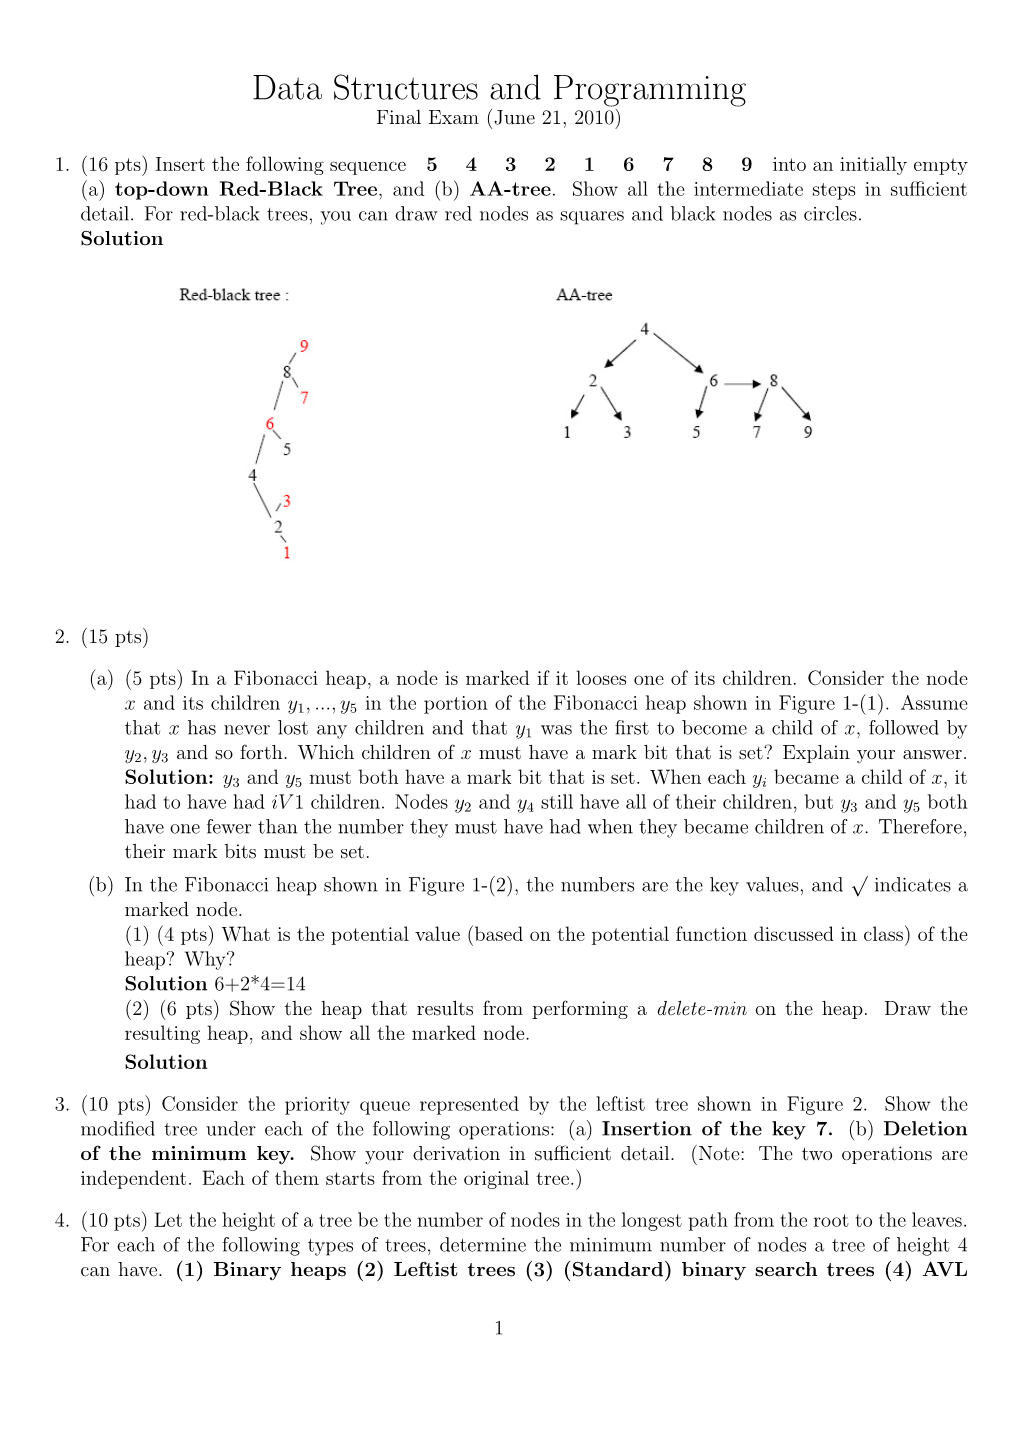 Data Structures and Programming Final Exam (June 21, 2010)